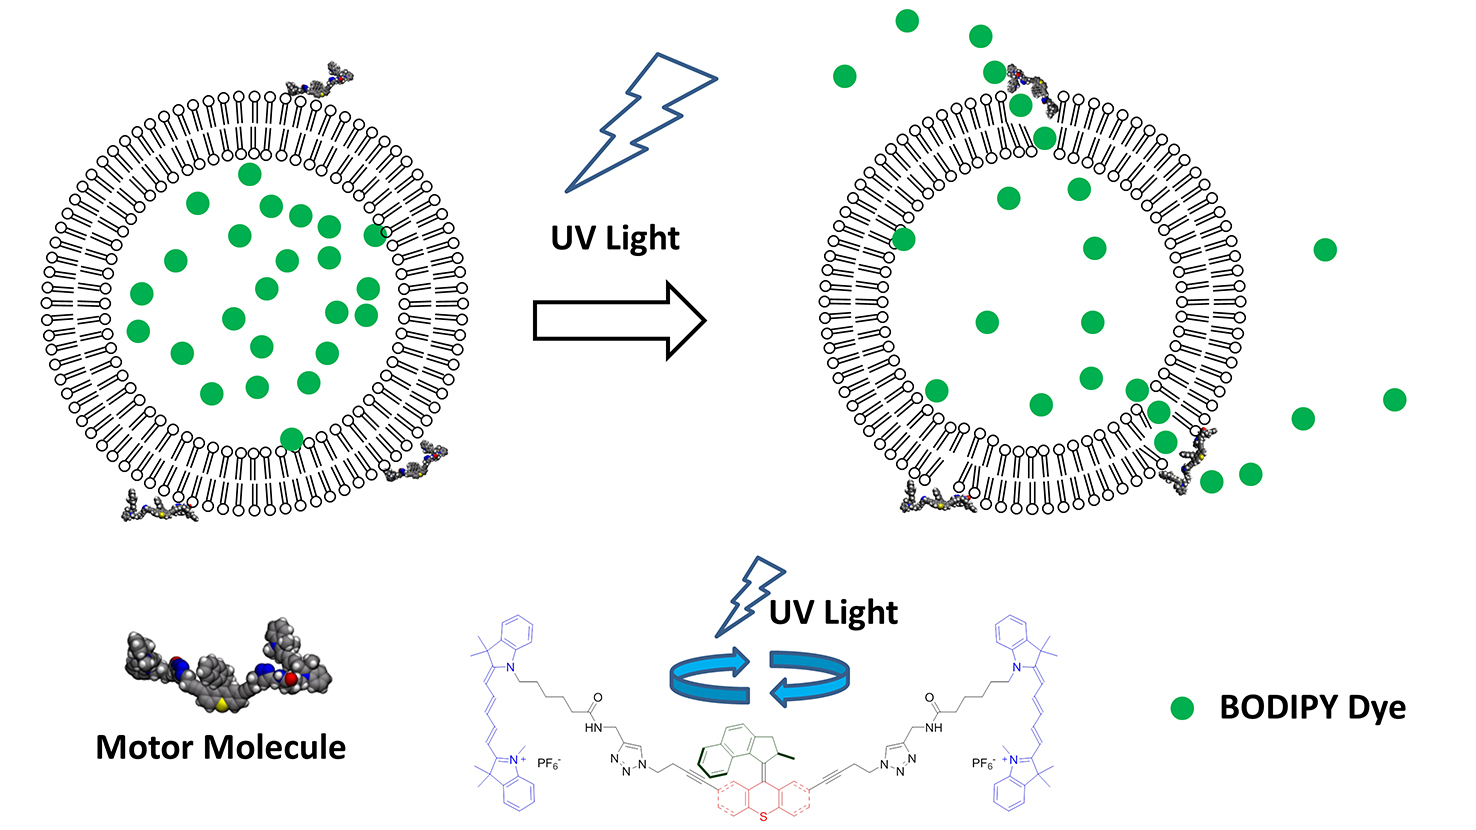 Motorized molecules open up synthetic membrane and release dye molecules from lipid vesicles upon light activation in a model system.